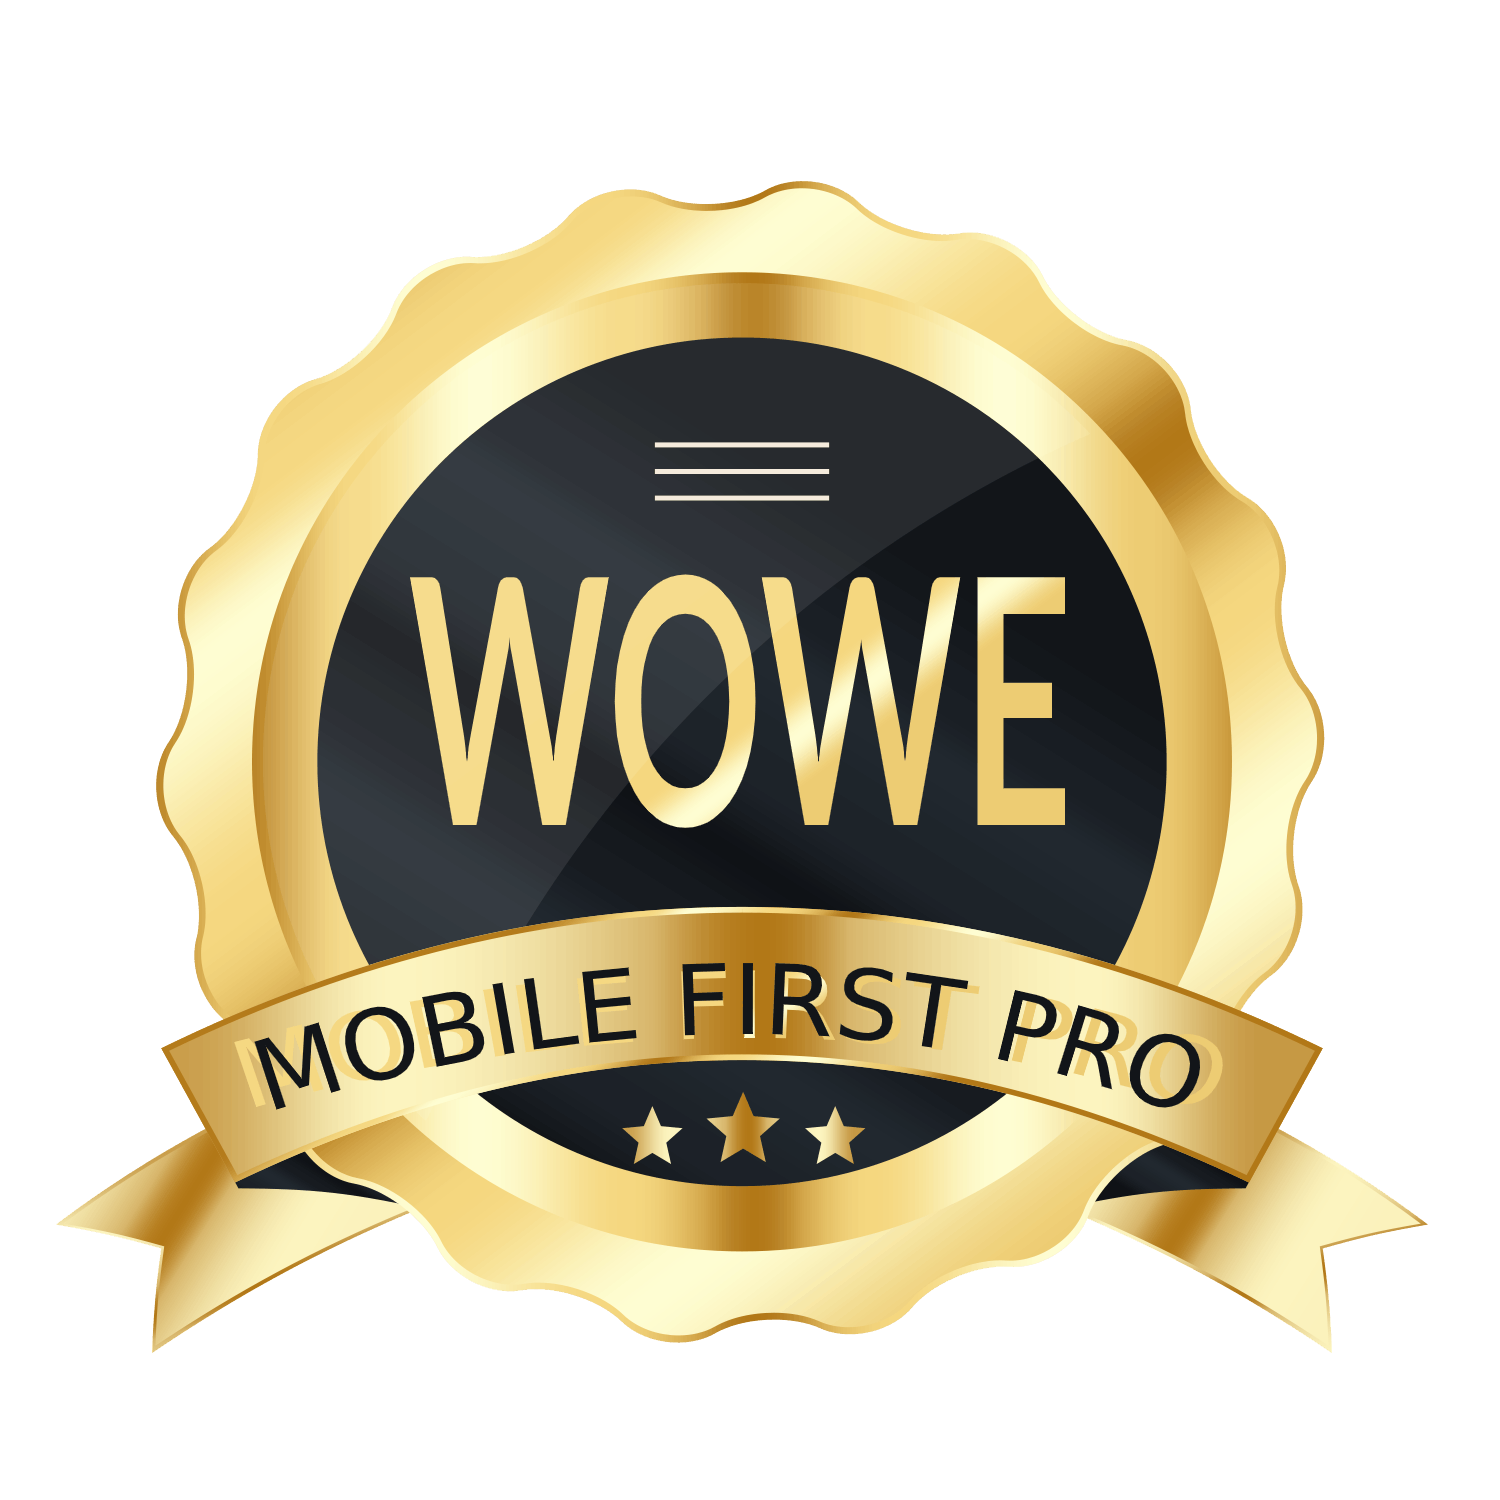 WOWE Mobile First Pro Websites